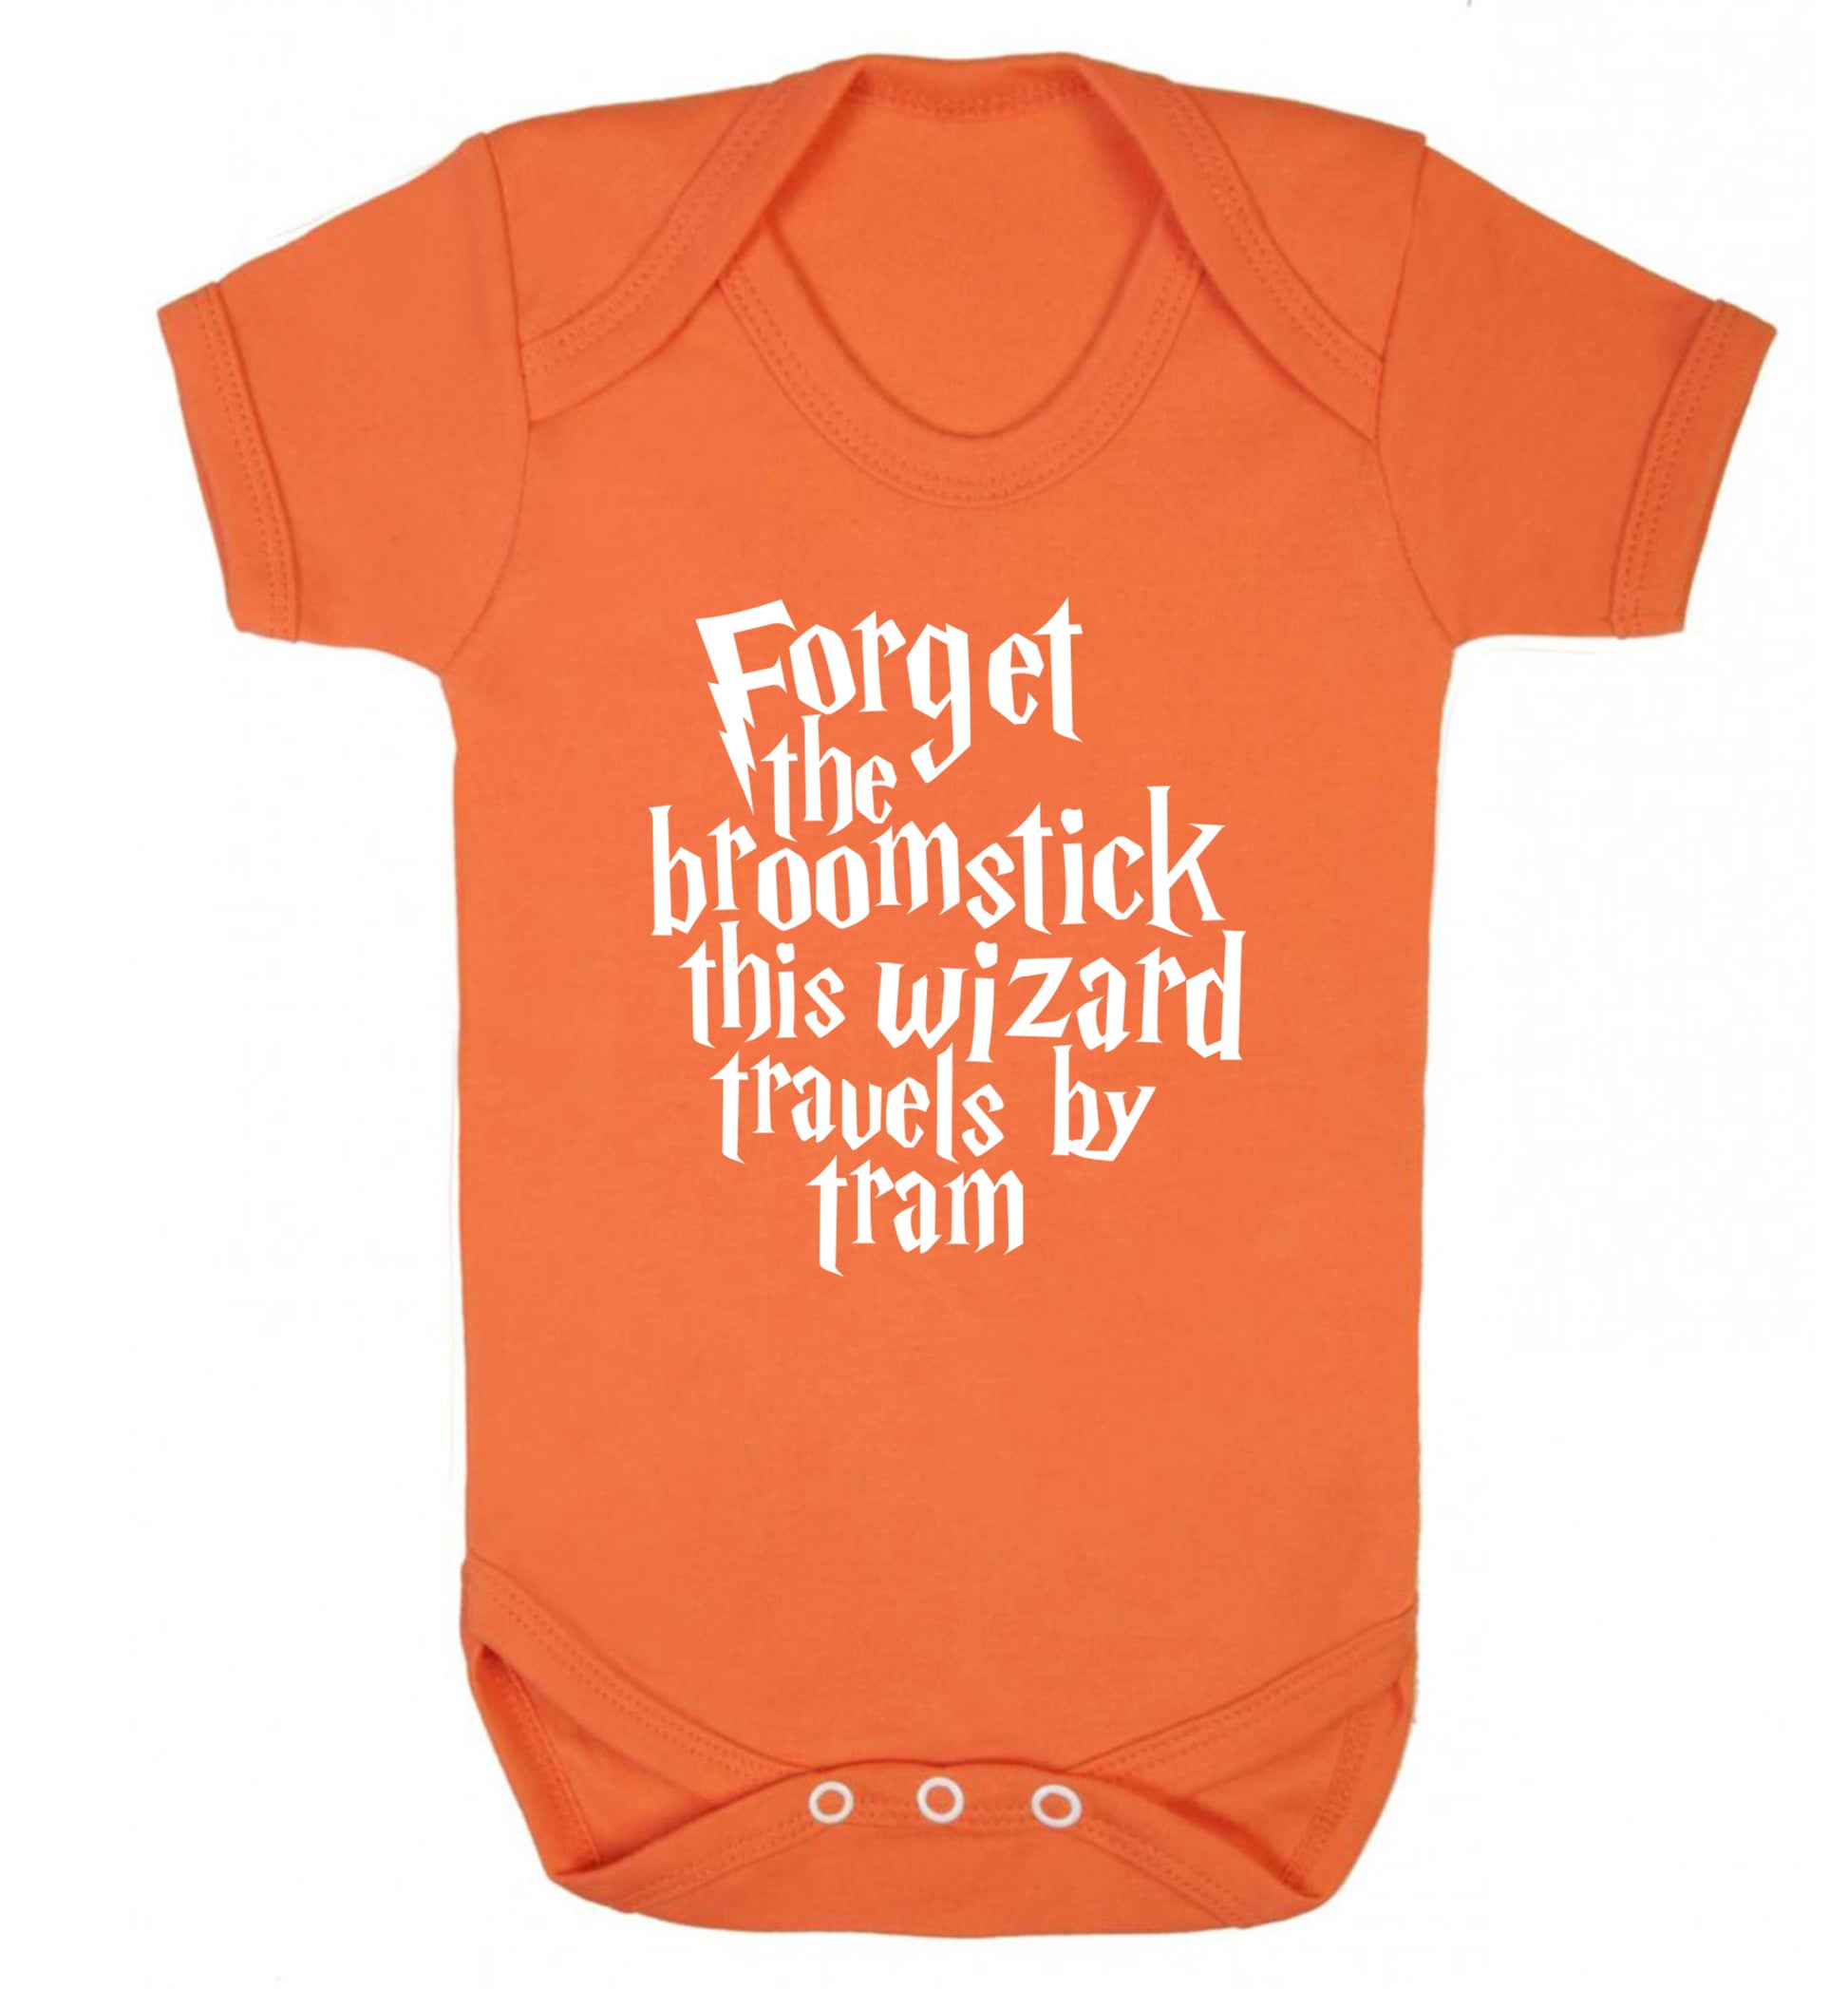 Forget the broomstick this wizard travels by tram Baby Vest orange 18-24 months